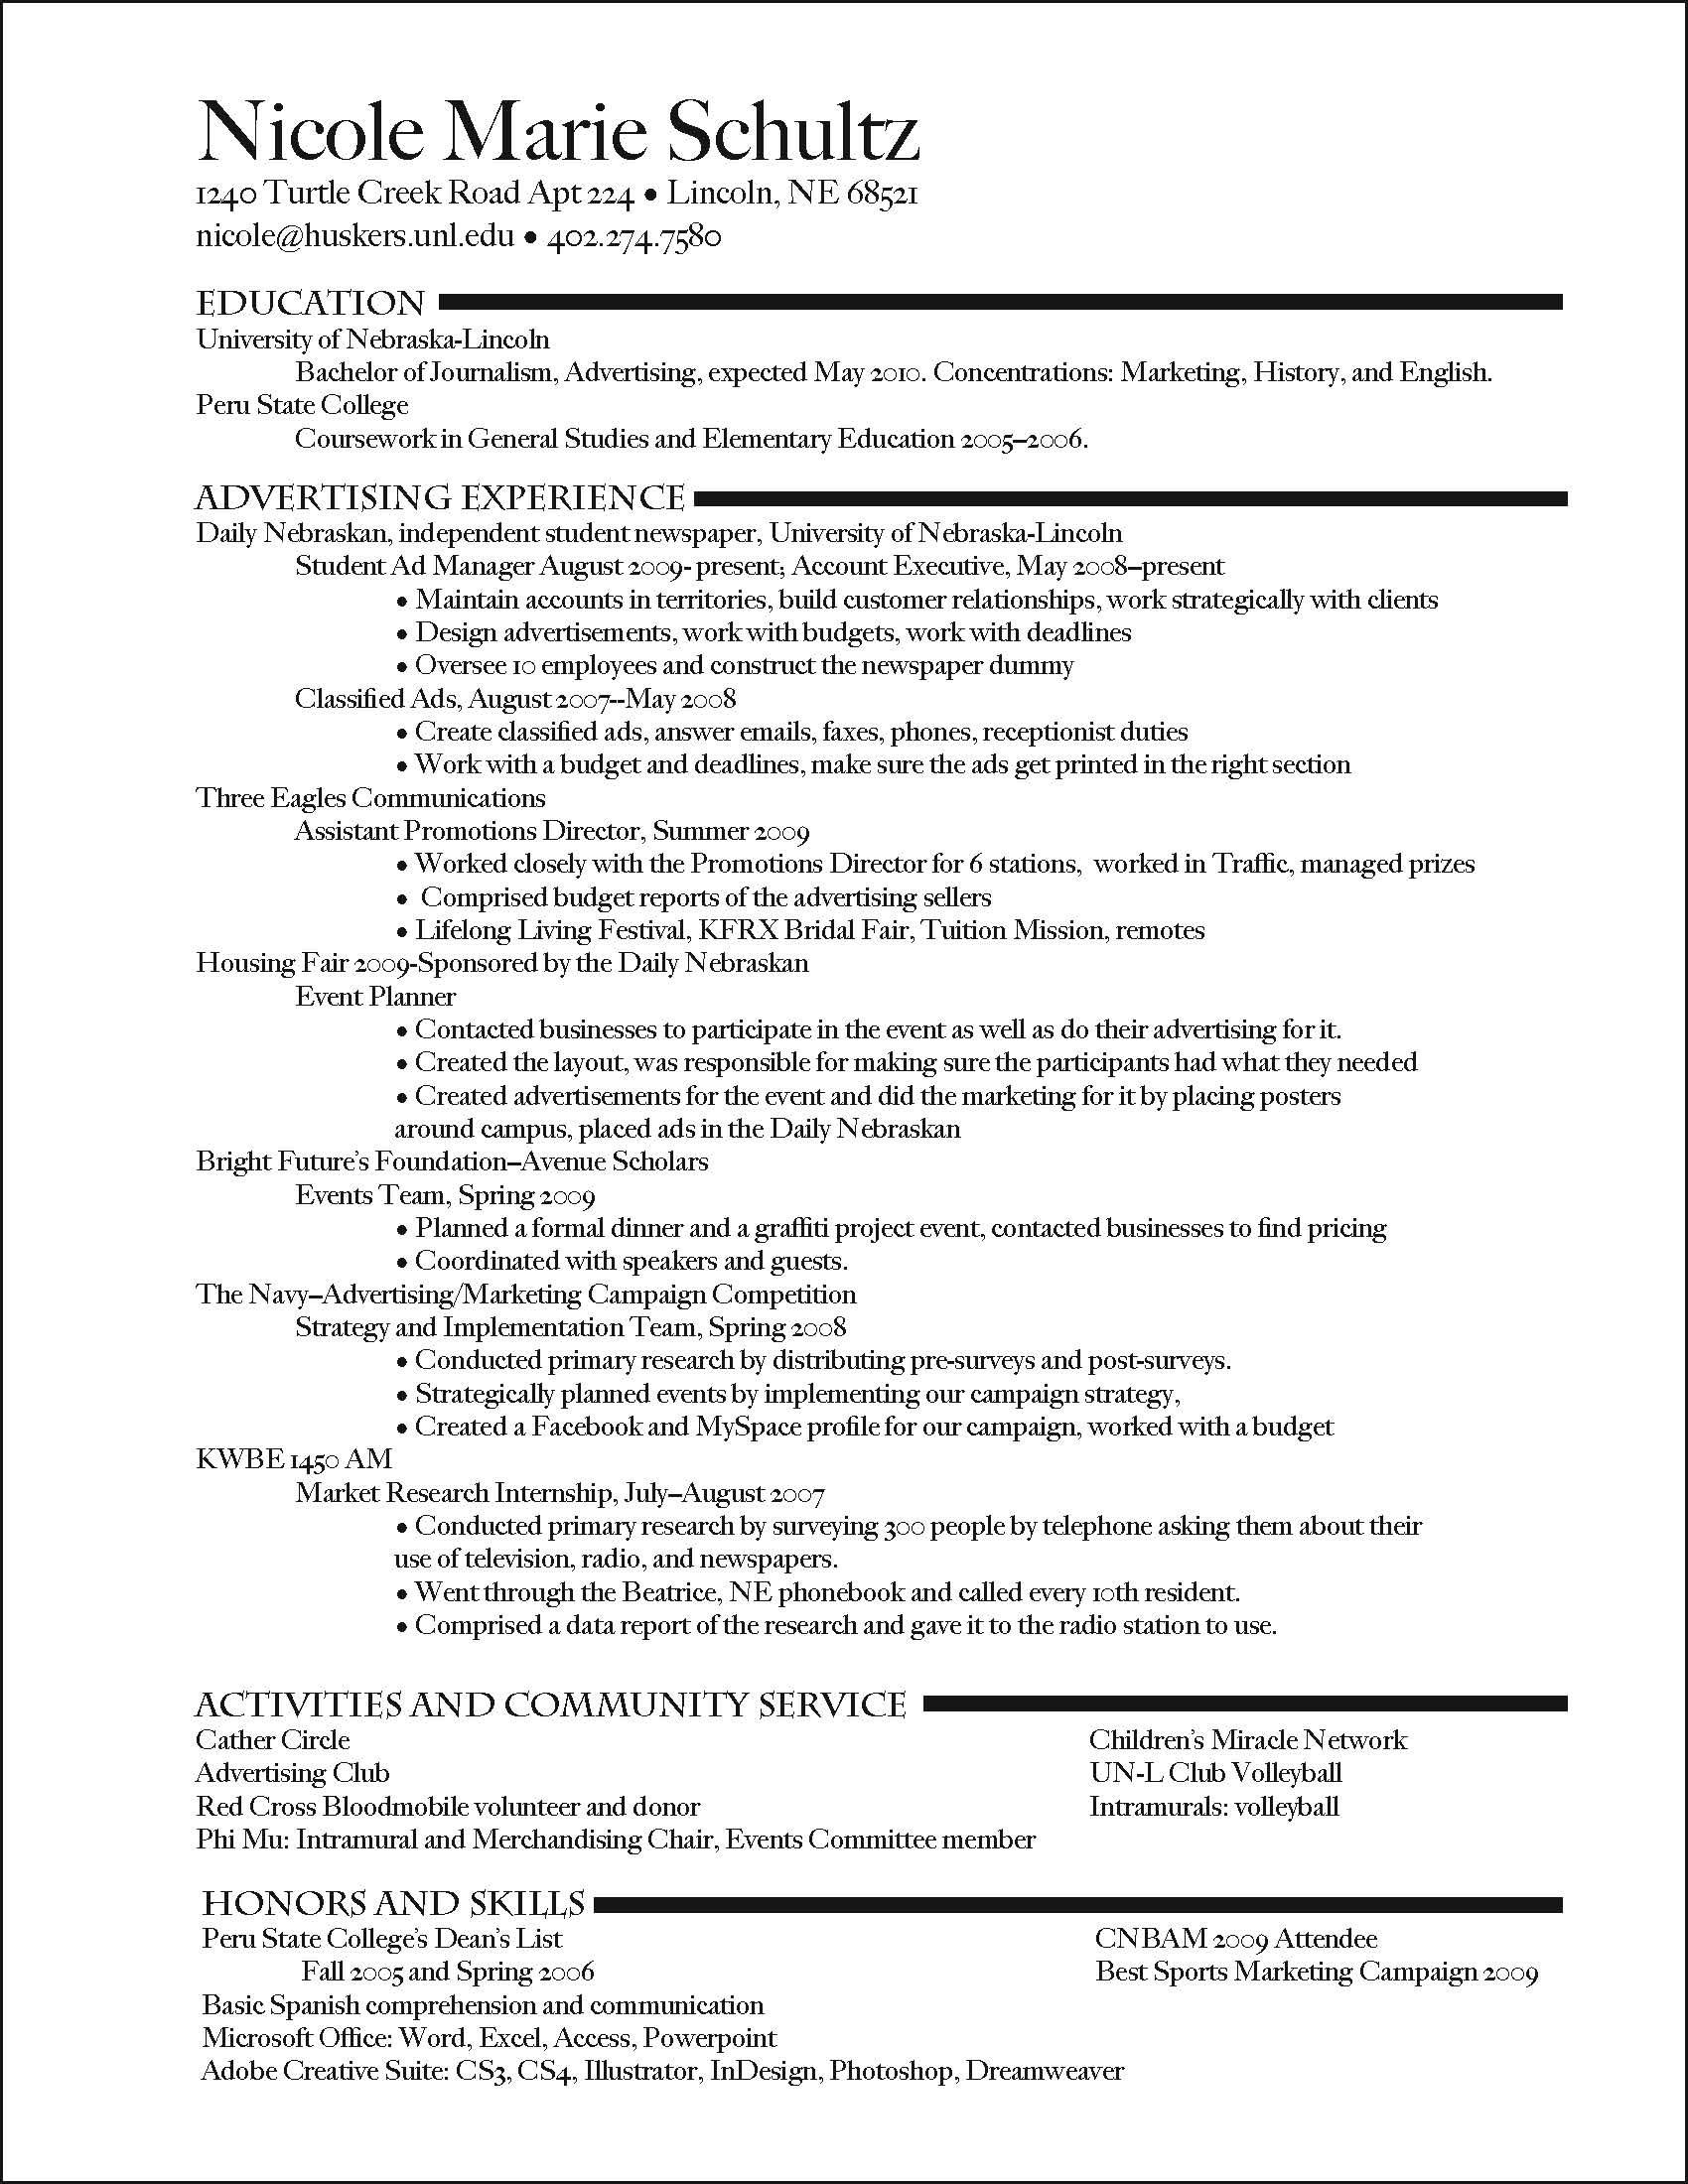 Resume References Available Upon Request Sample Resume format References Available Upon Request – Resume format …